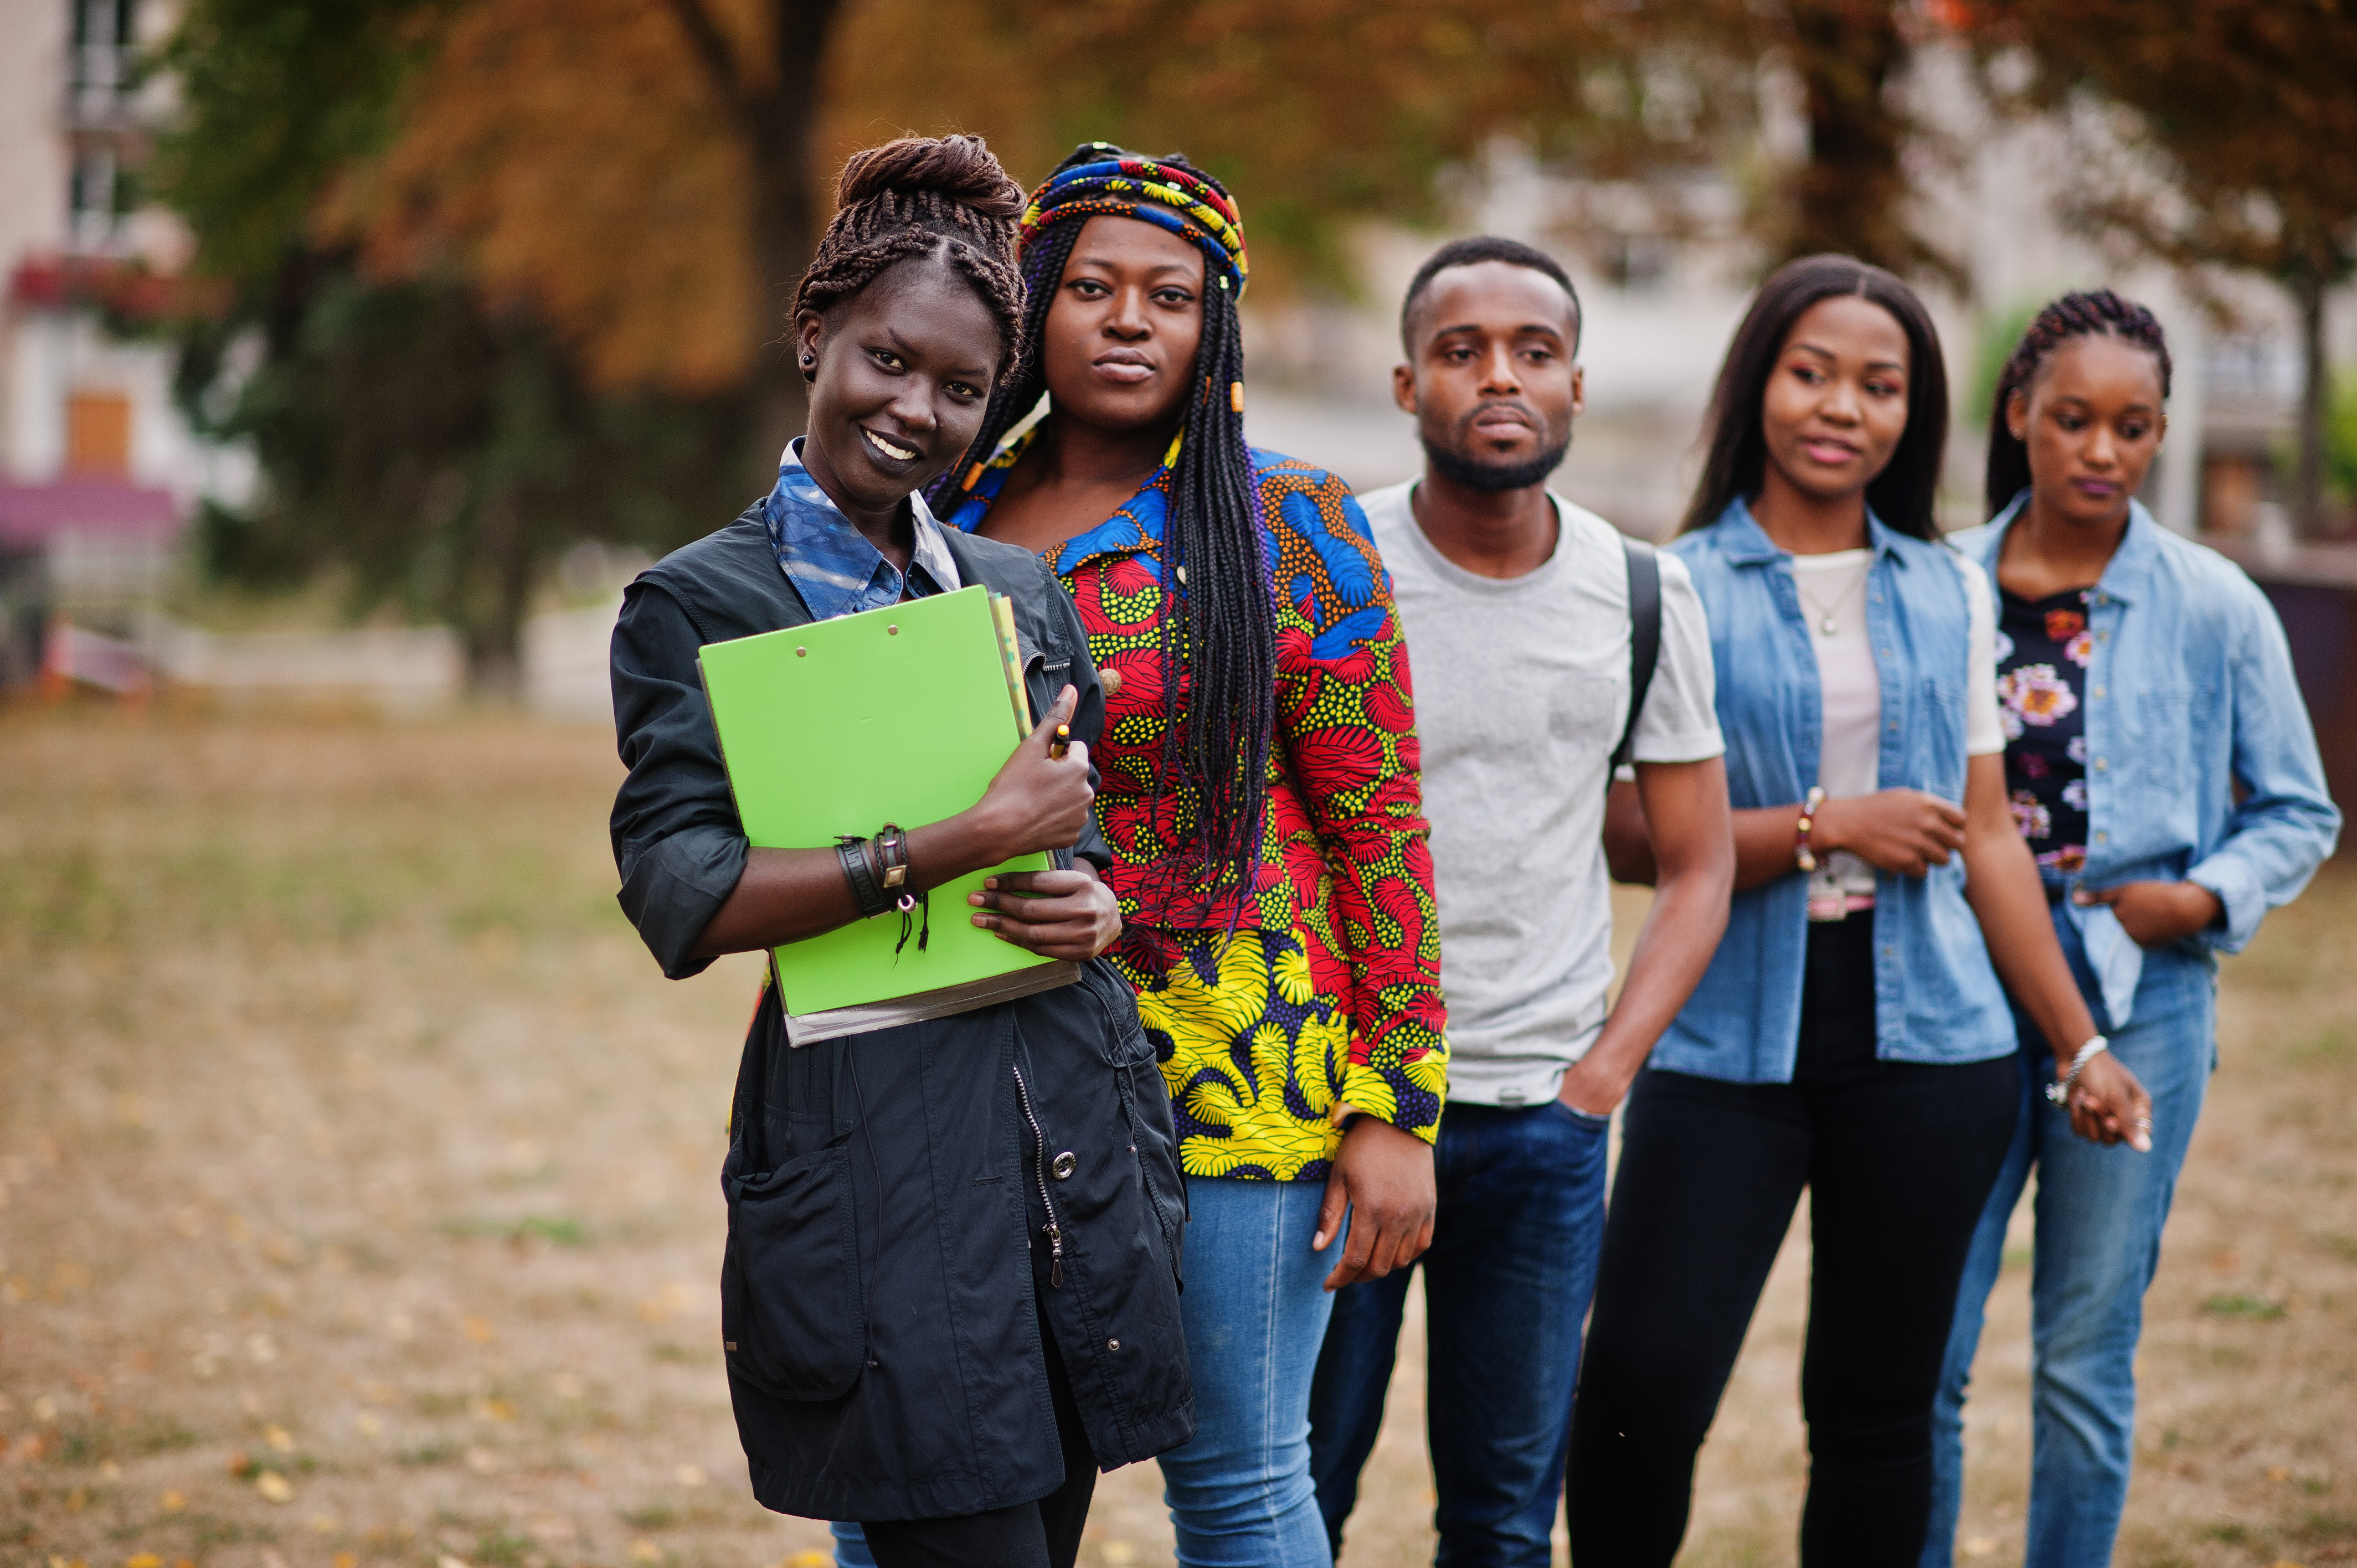 Youth Unemployment and Gender Inequality in Africa